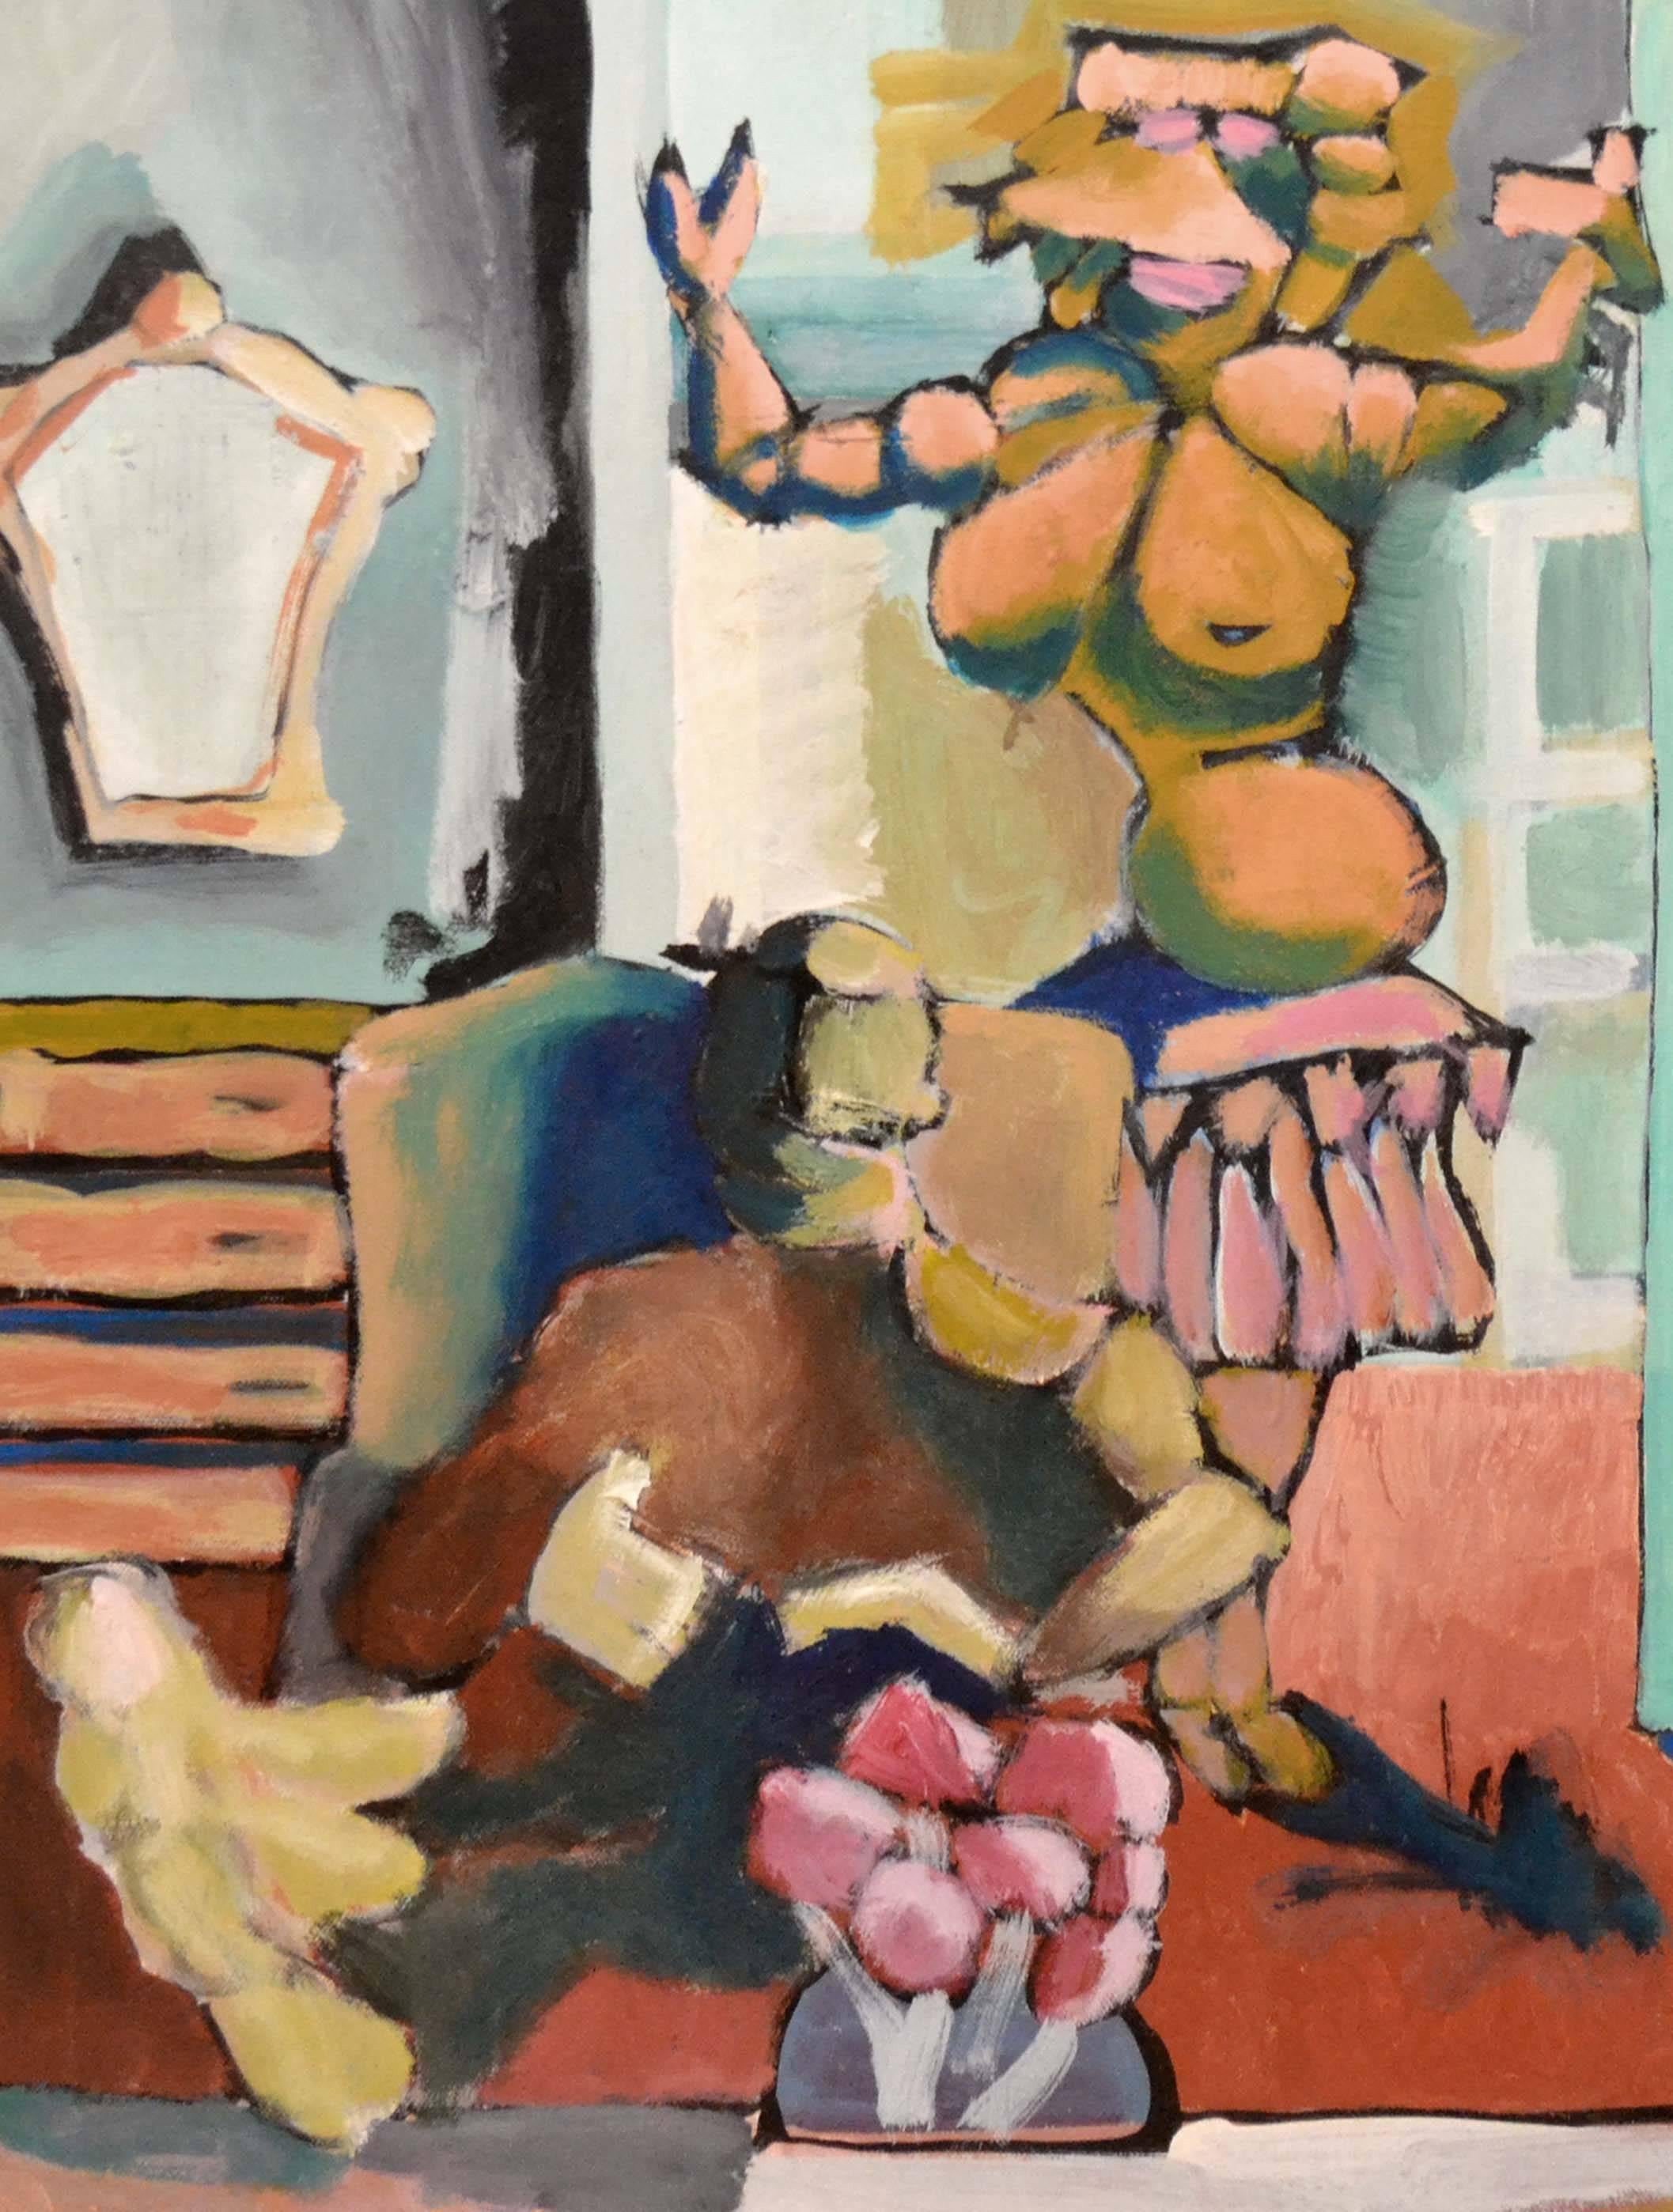 Contemporary Figural Abstract Interior, Modernist Living Room Scene - Painting by Michael Eggleston